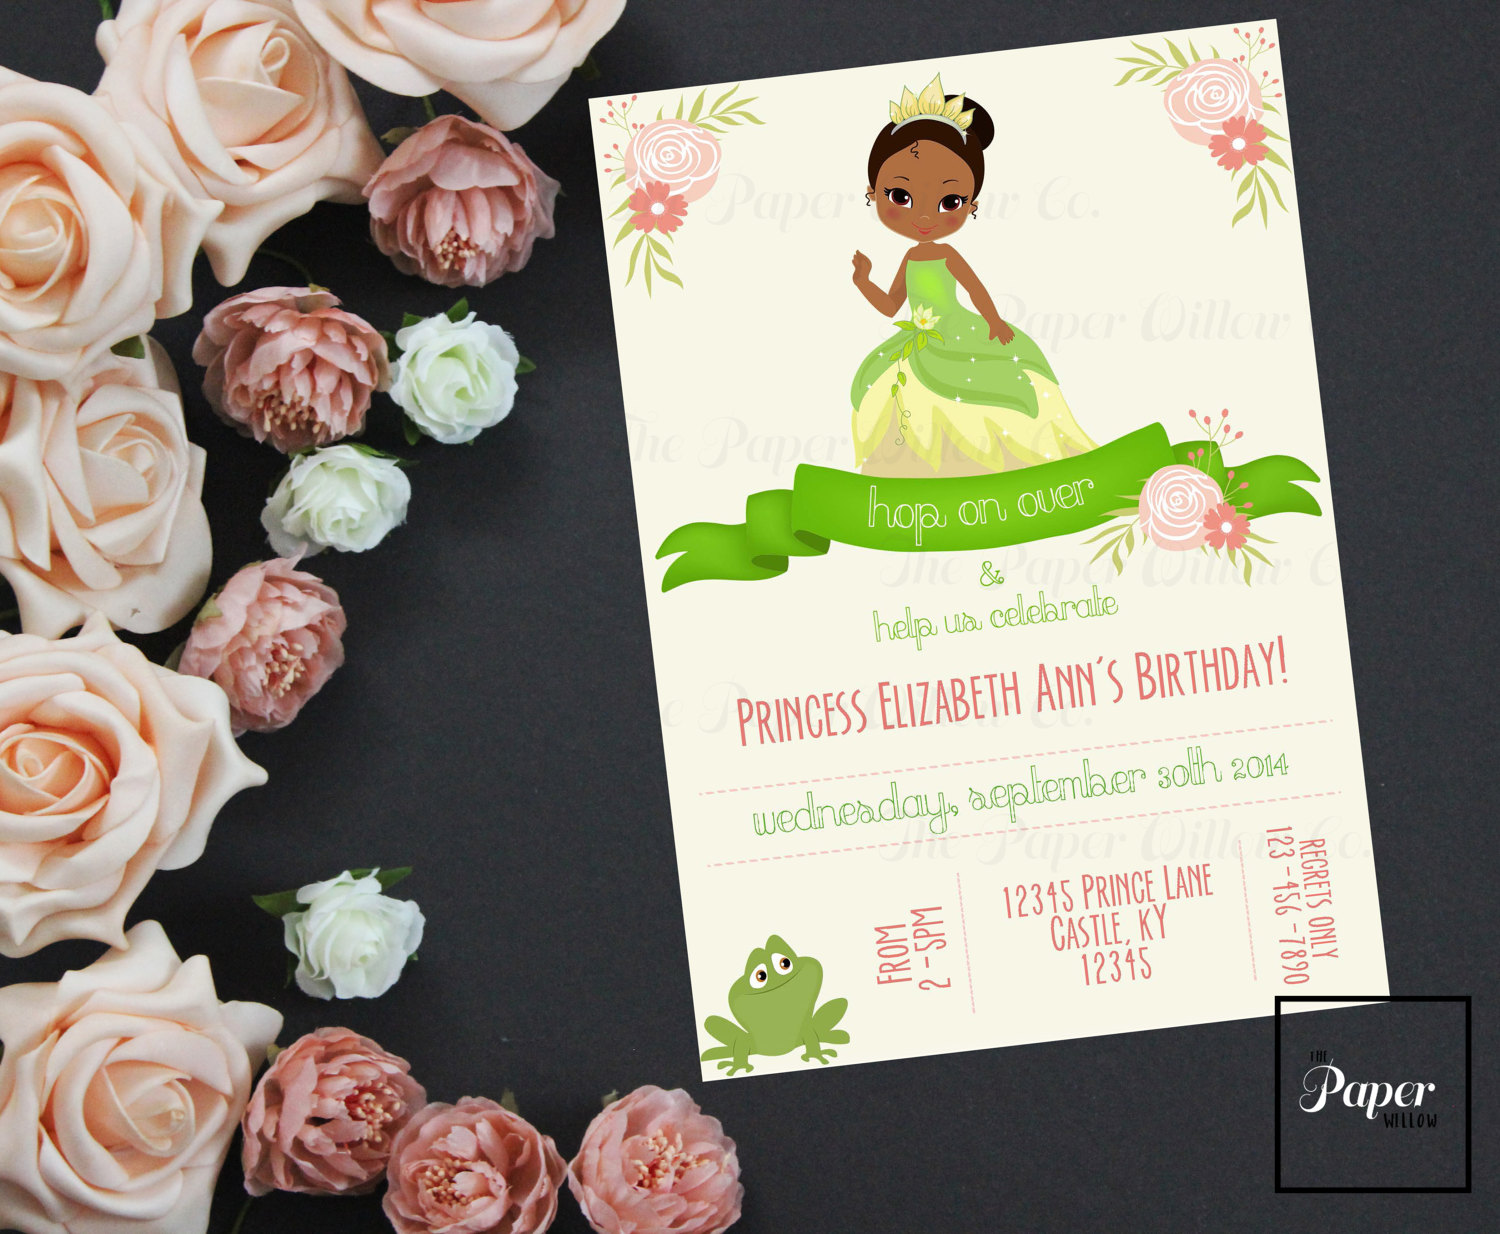 Princess And The Frog Invitation Template